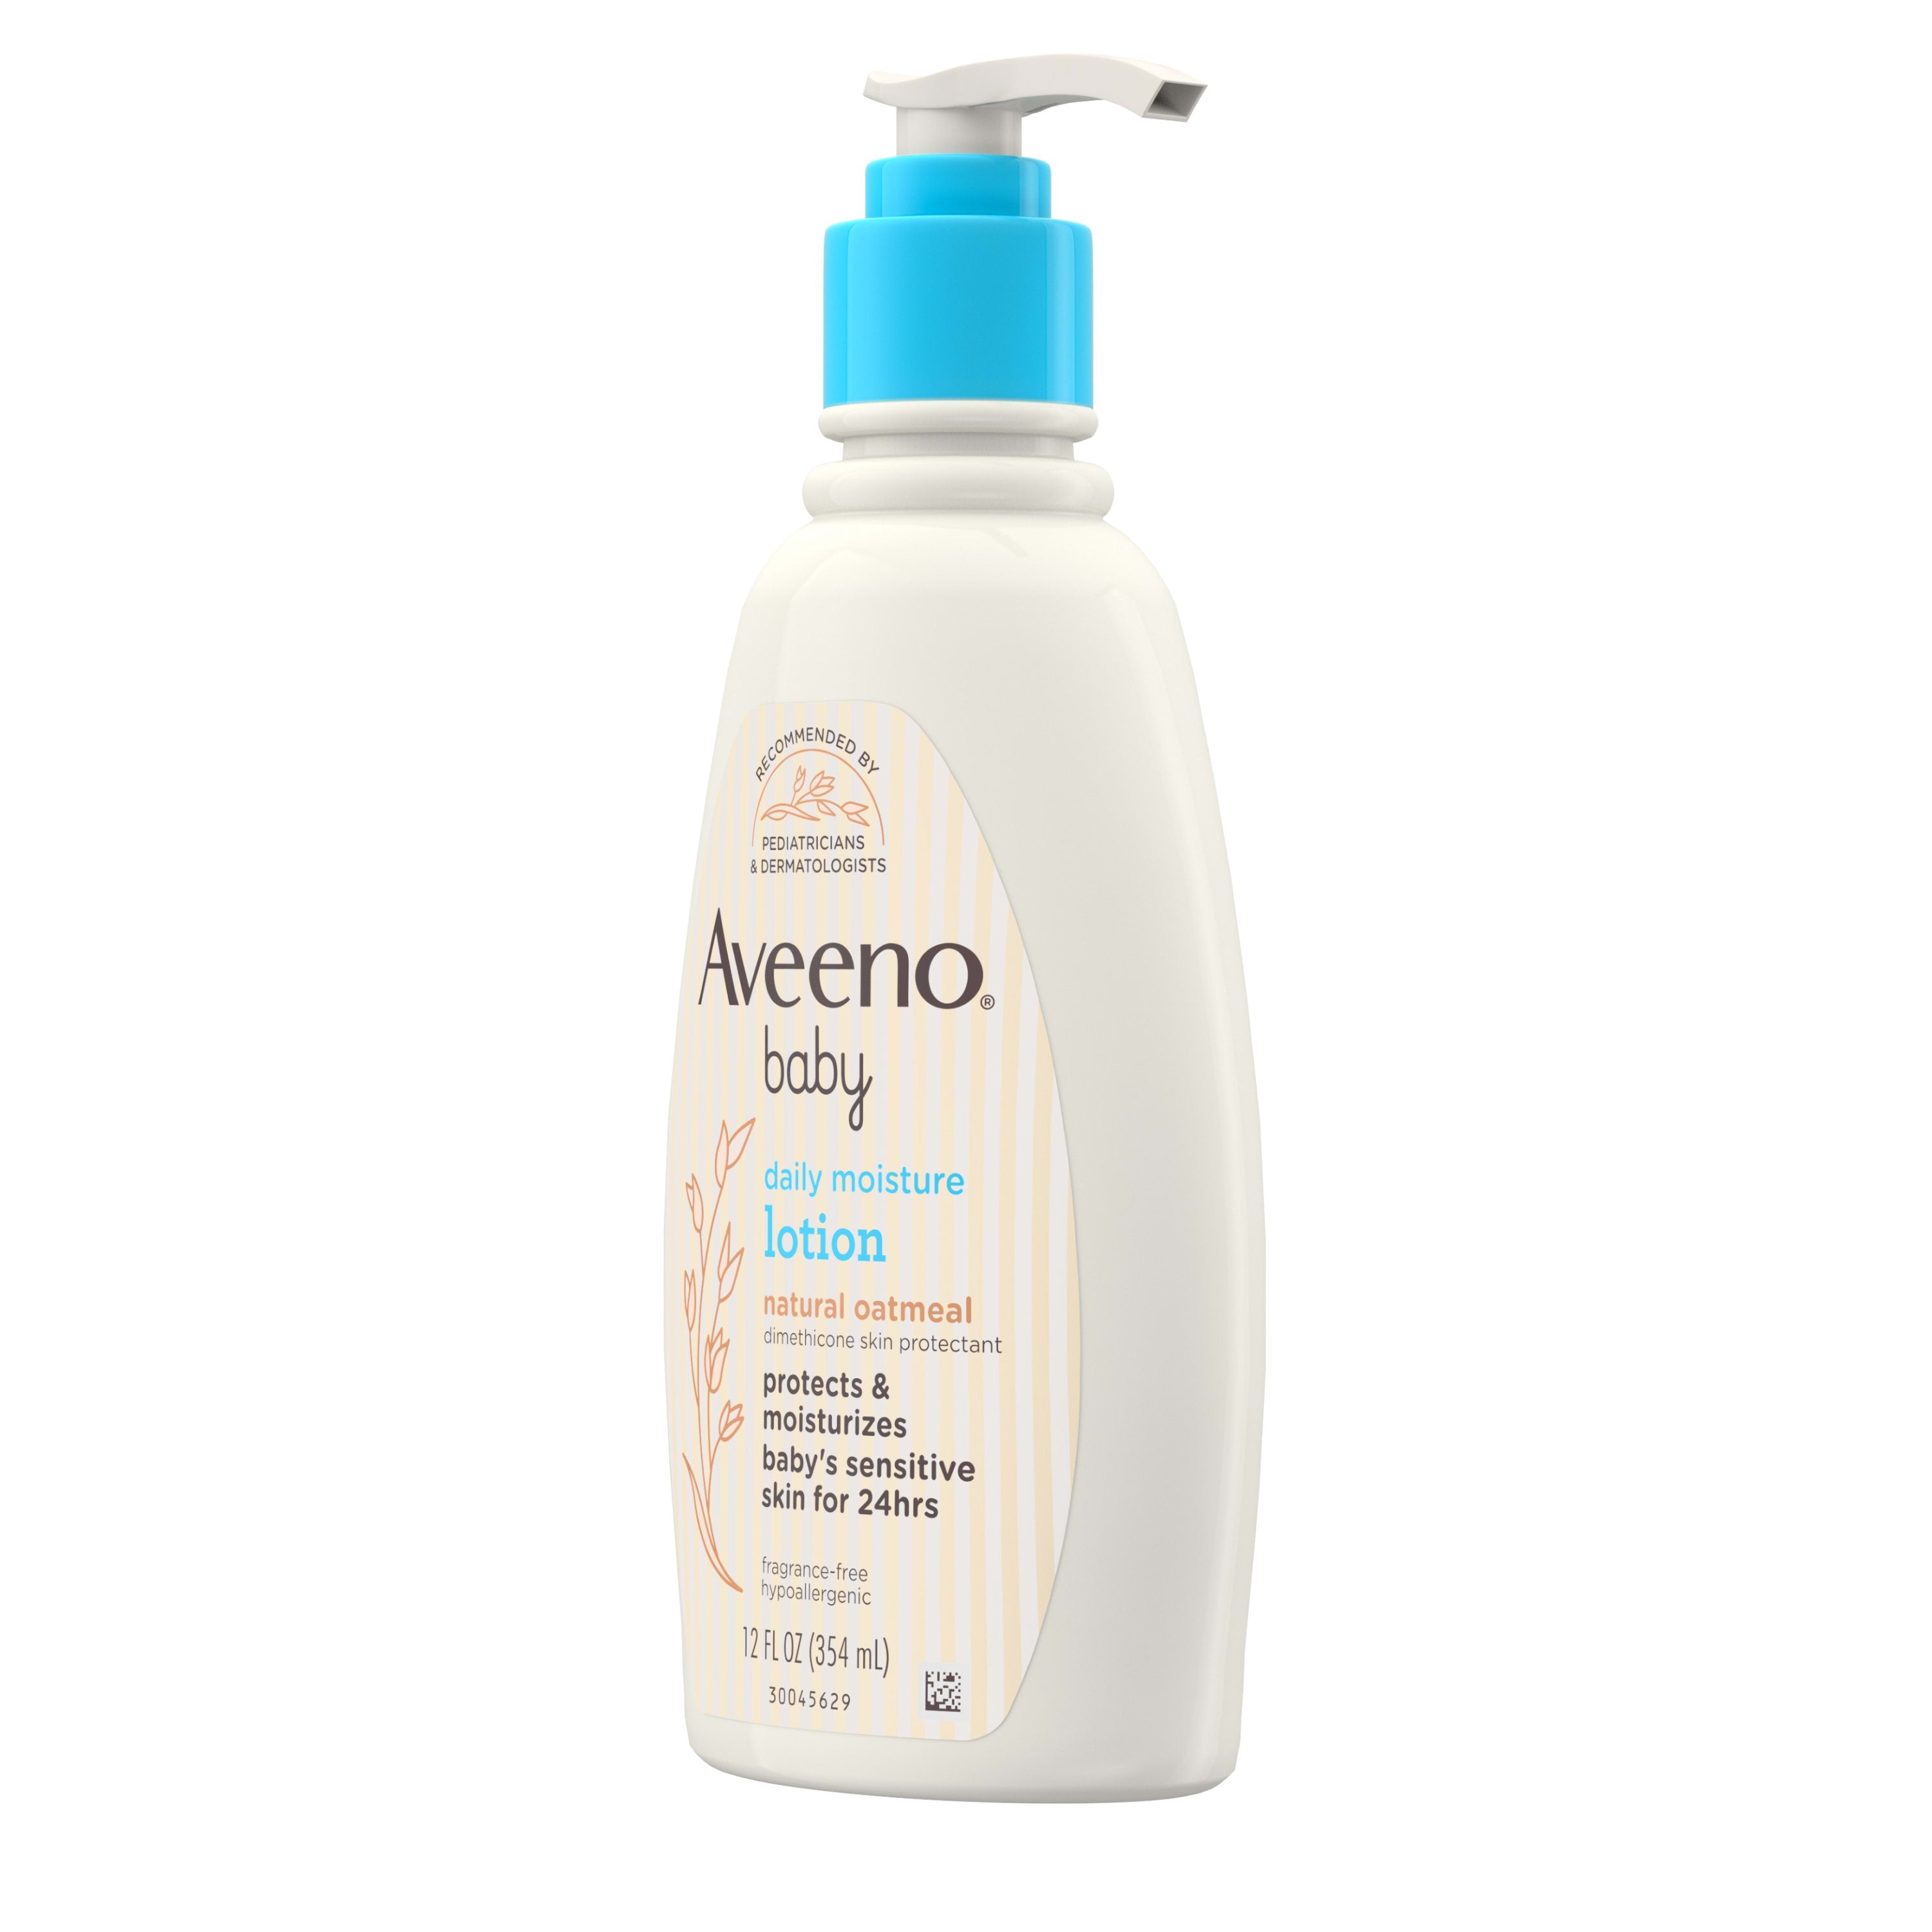 Aveeno Baby Daily Moisture Lotion with Natural Oatmeal 354 ml